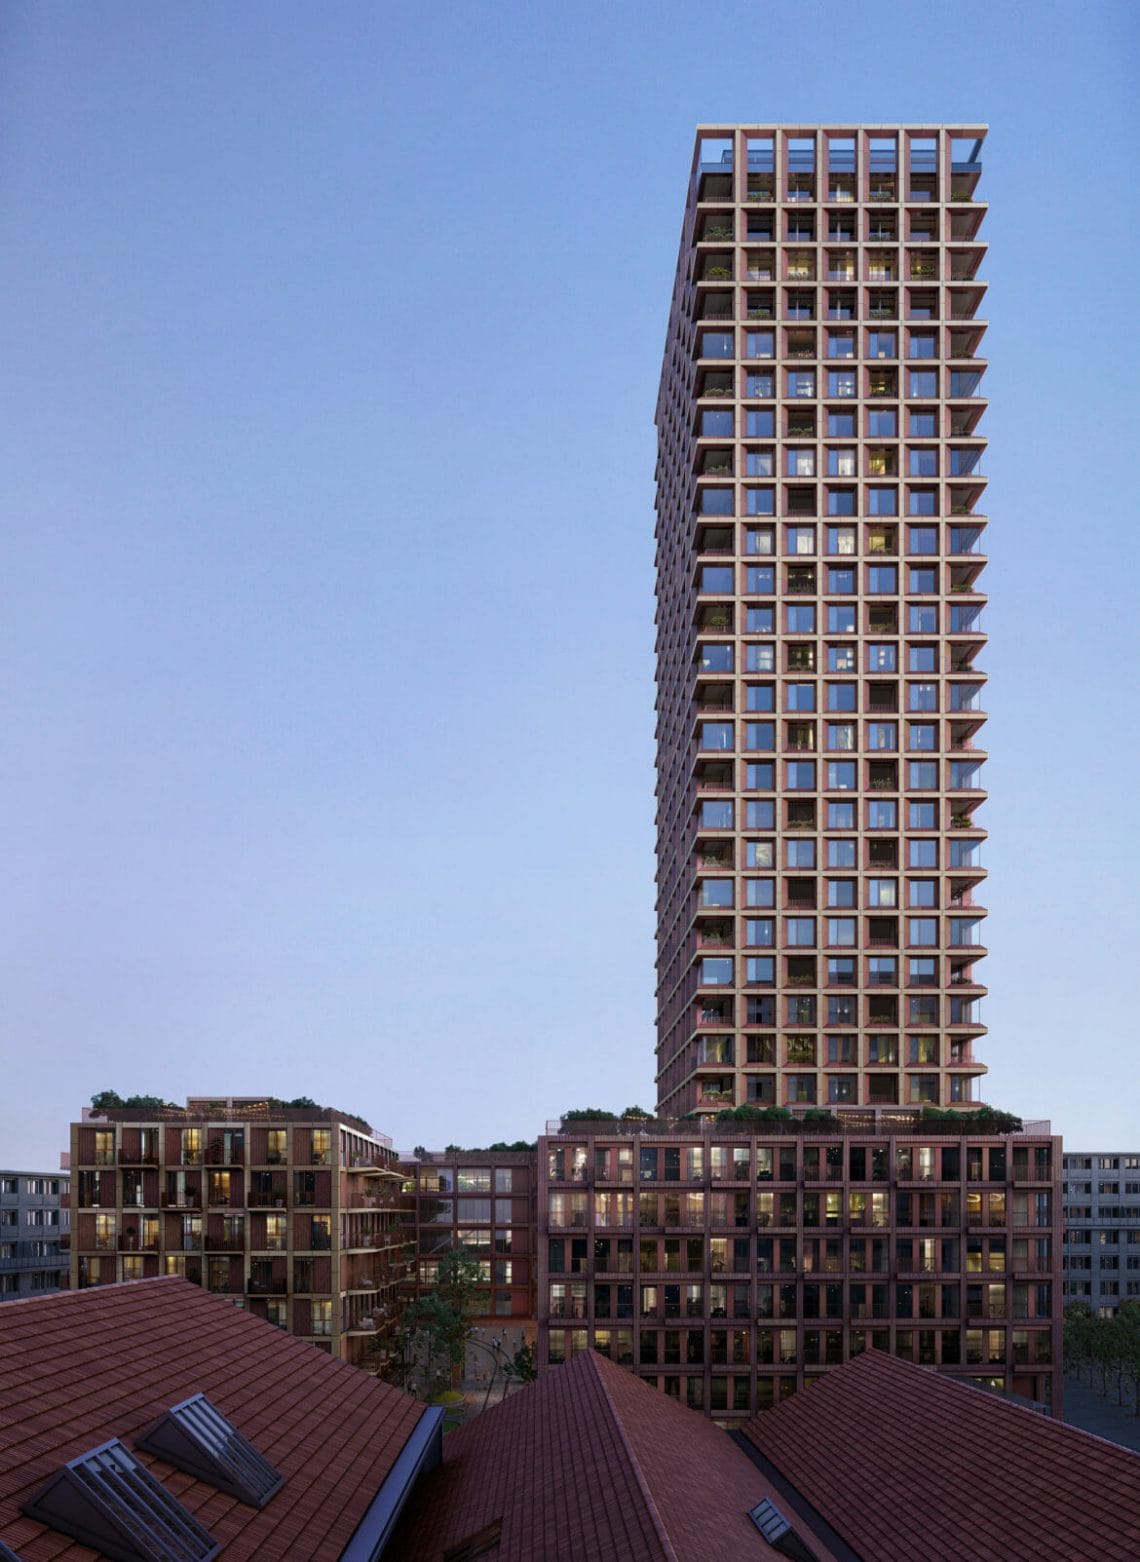 100-meter tall Residential Building Rocket&Tigerli by Schmidt Hammer Lassen Architects  uses a Timber Load Bearing Structure